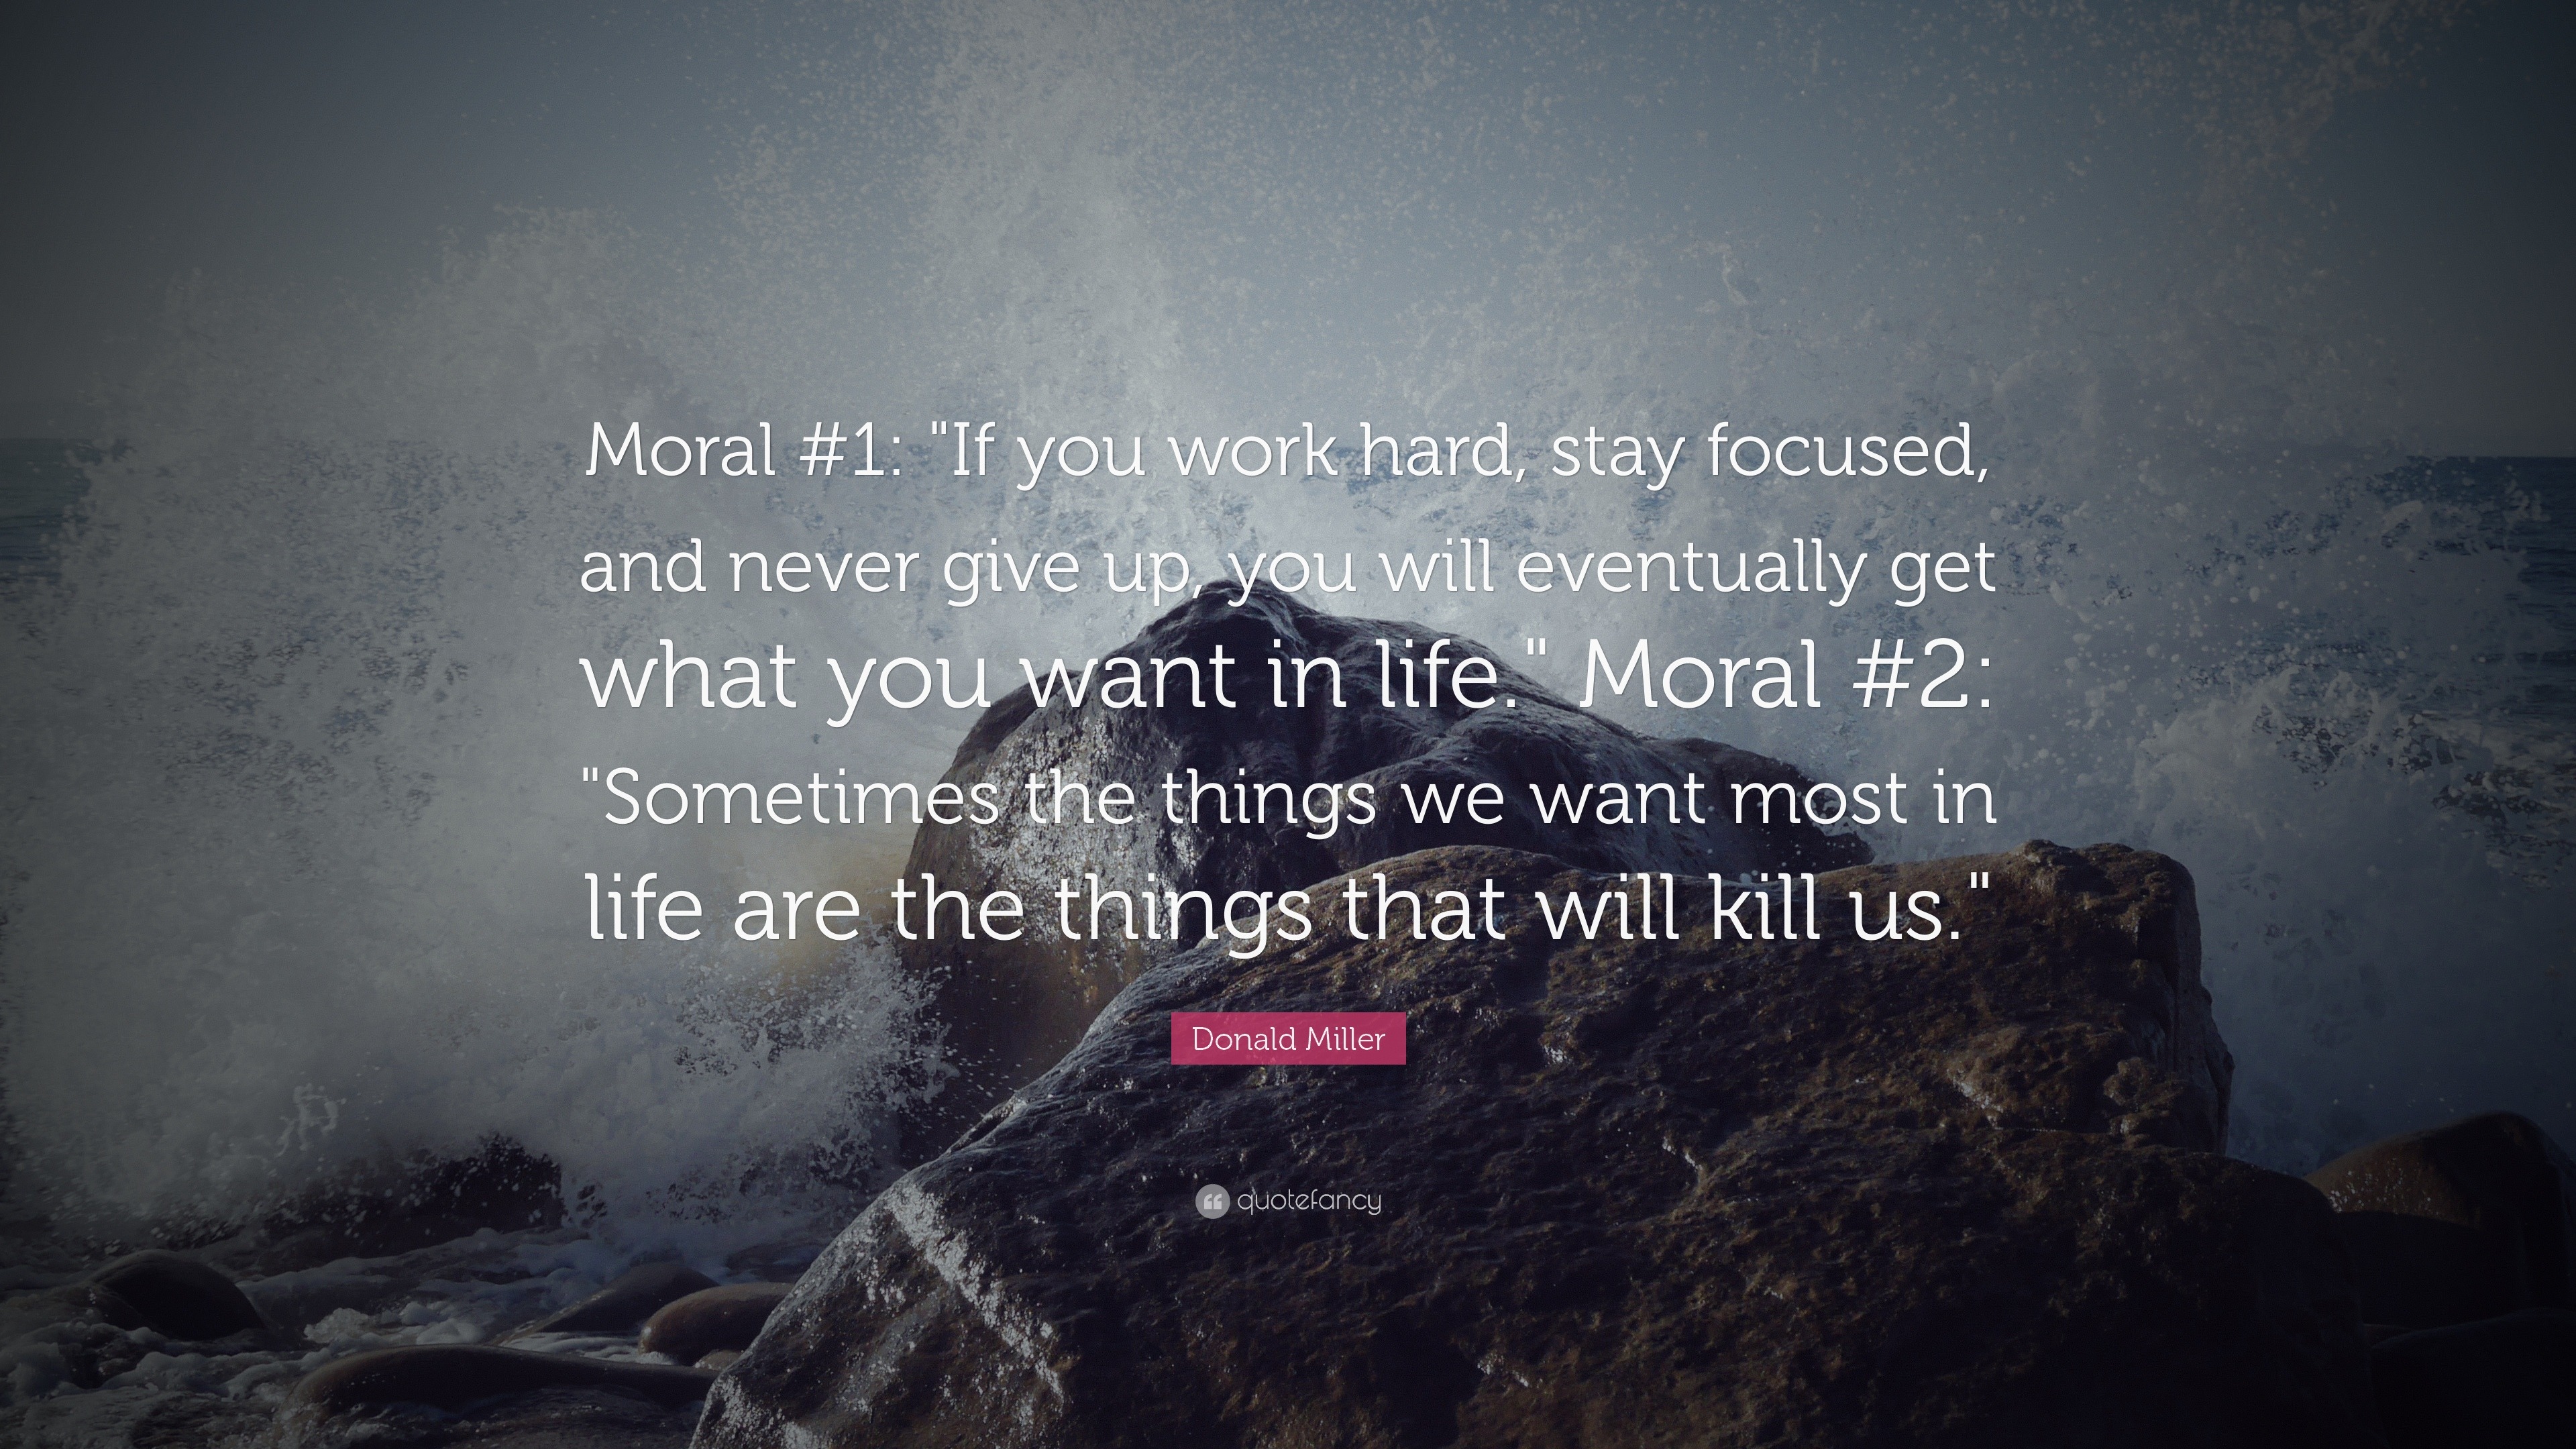 Donald Miller Quote “Moral 1 "If you work hard stay